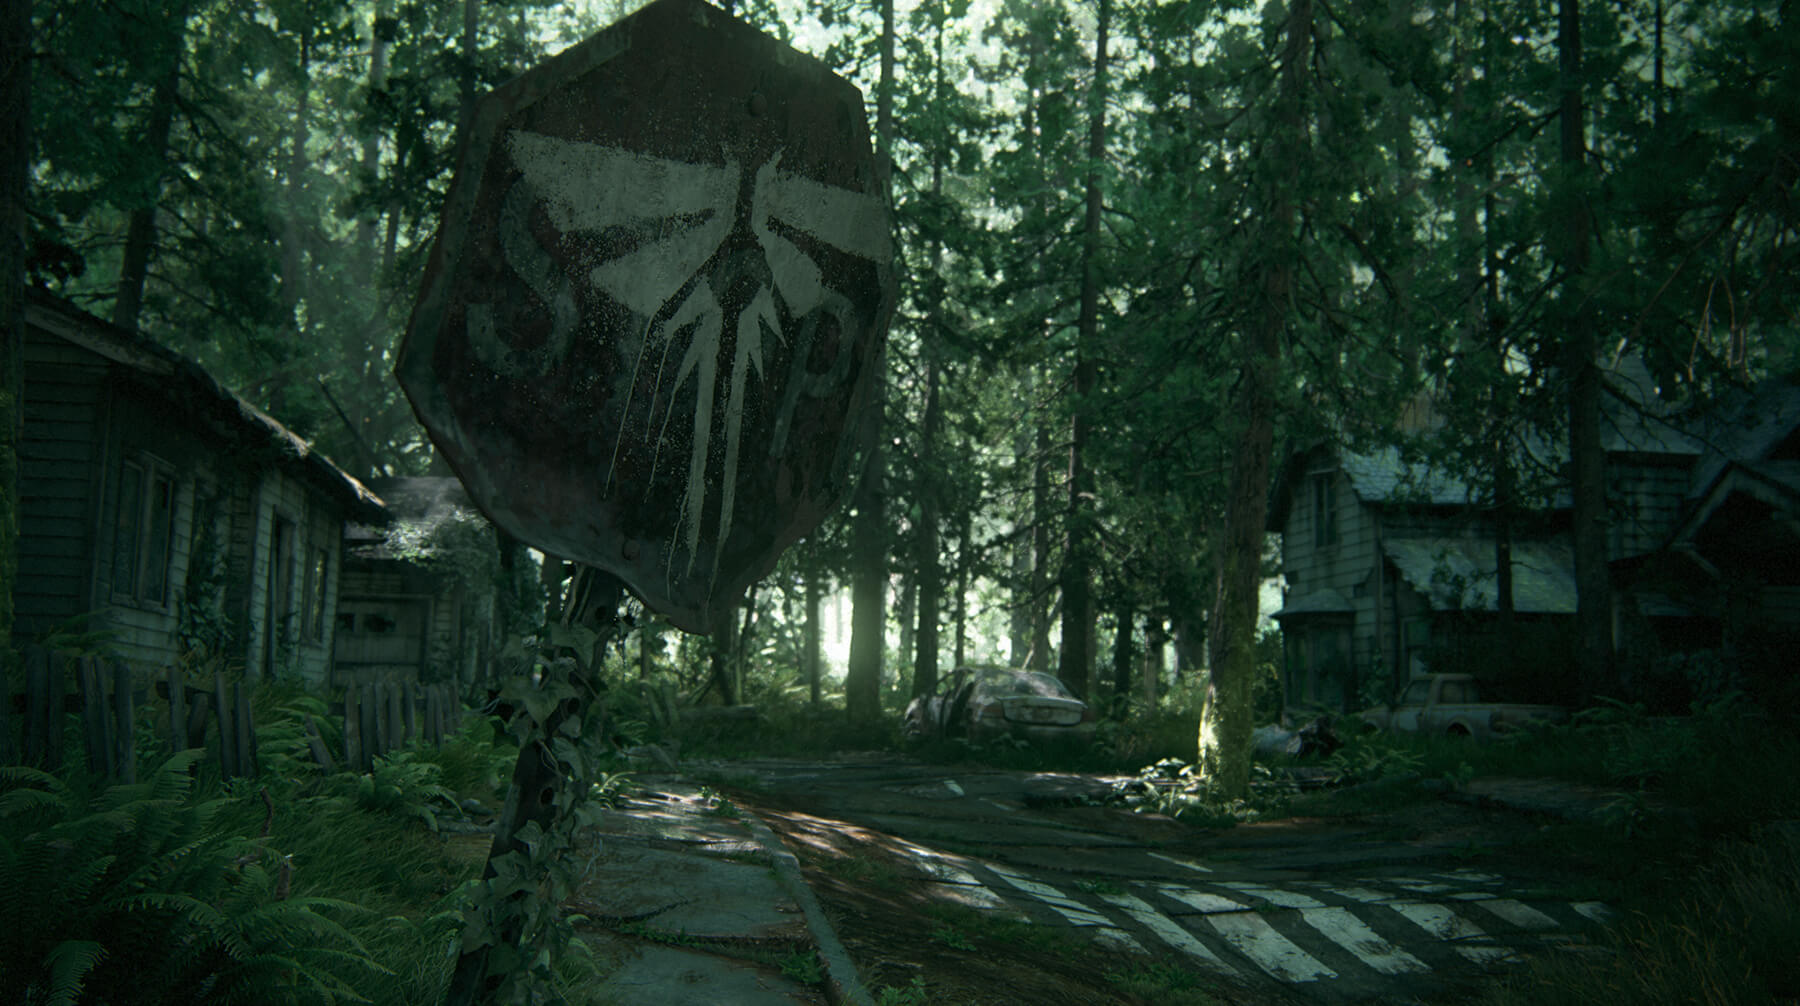 A decaying residential street, surrounded by forest